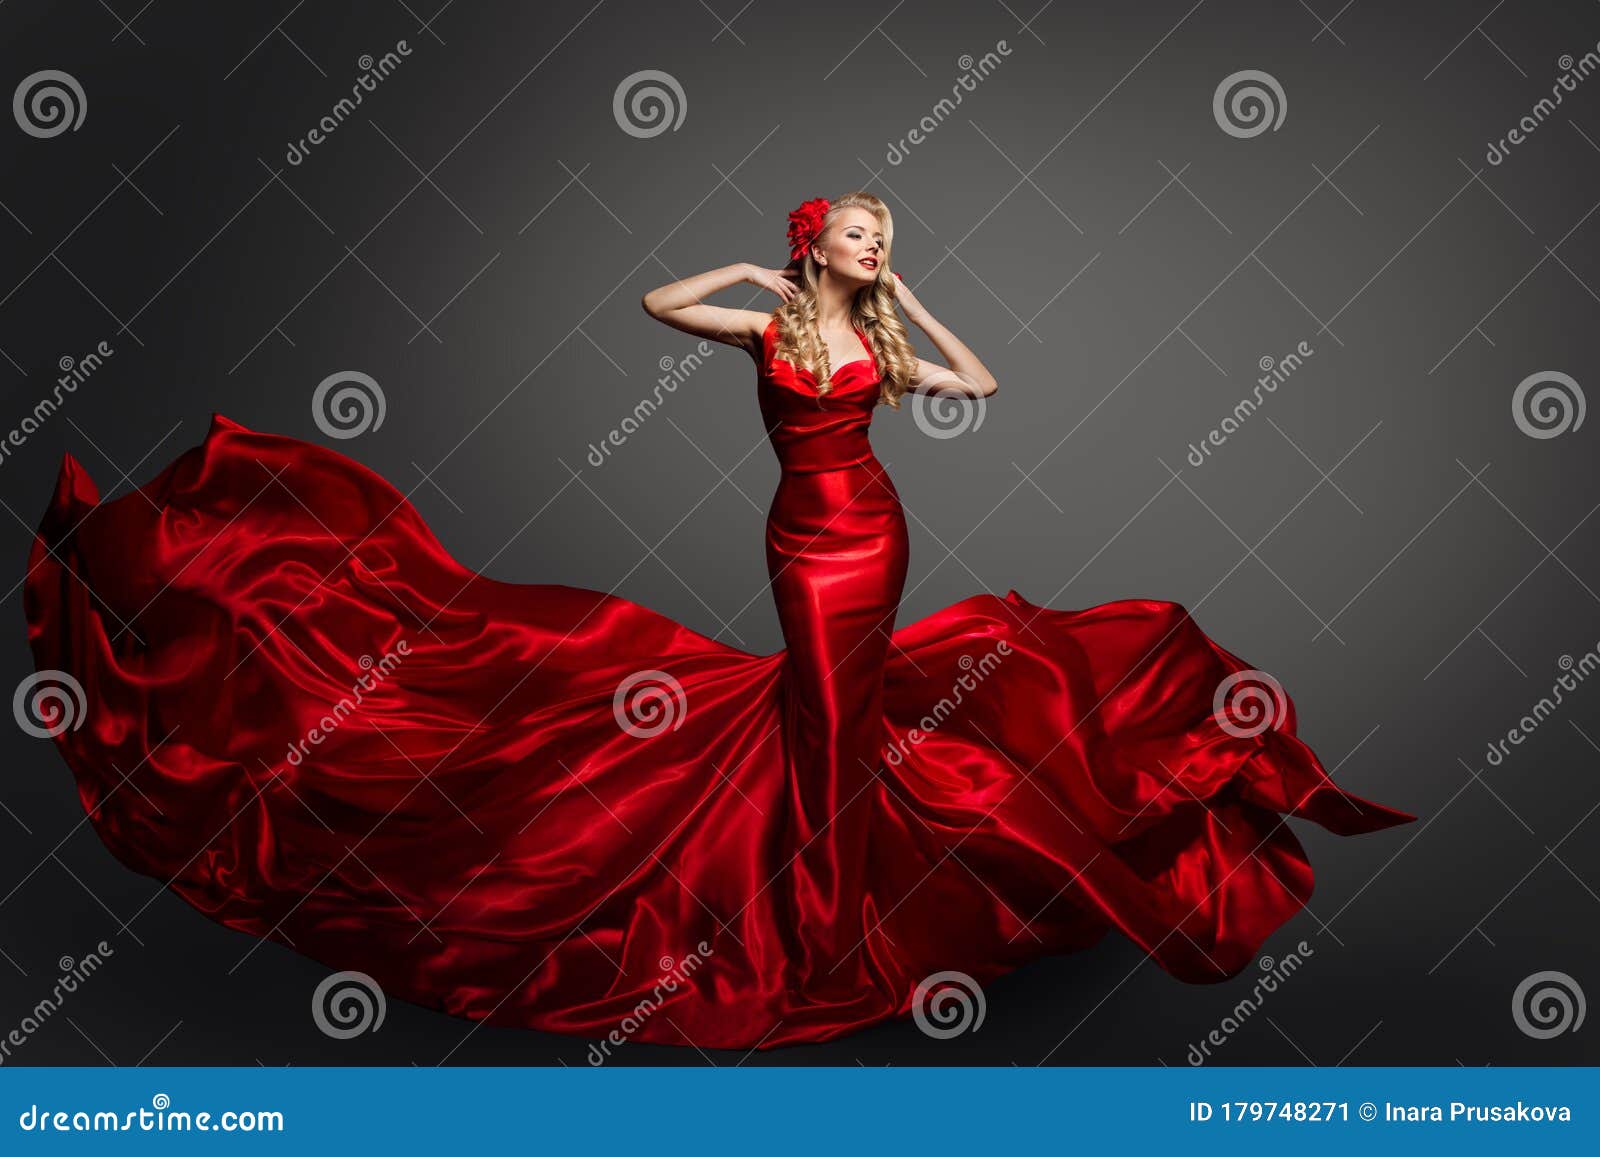 Red Gown Pictures | Download Free Images on Unsplash